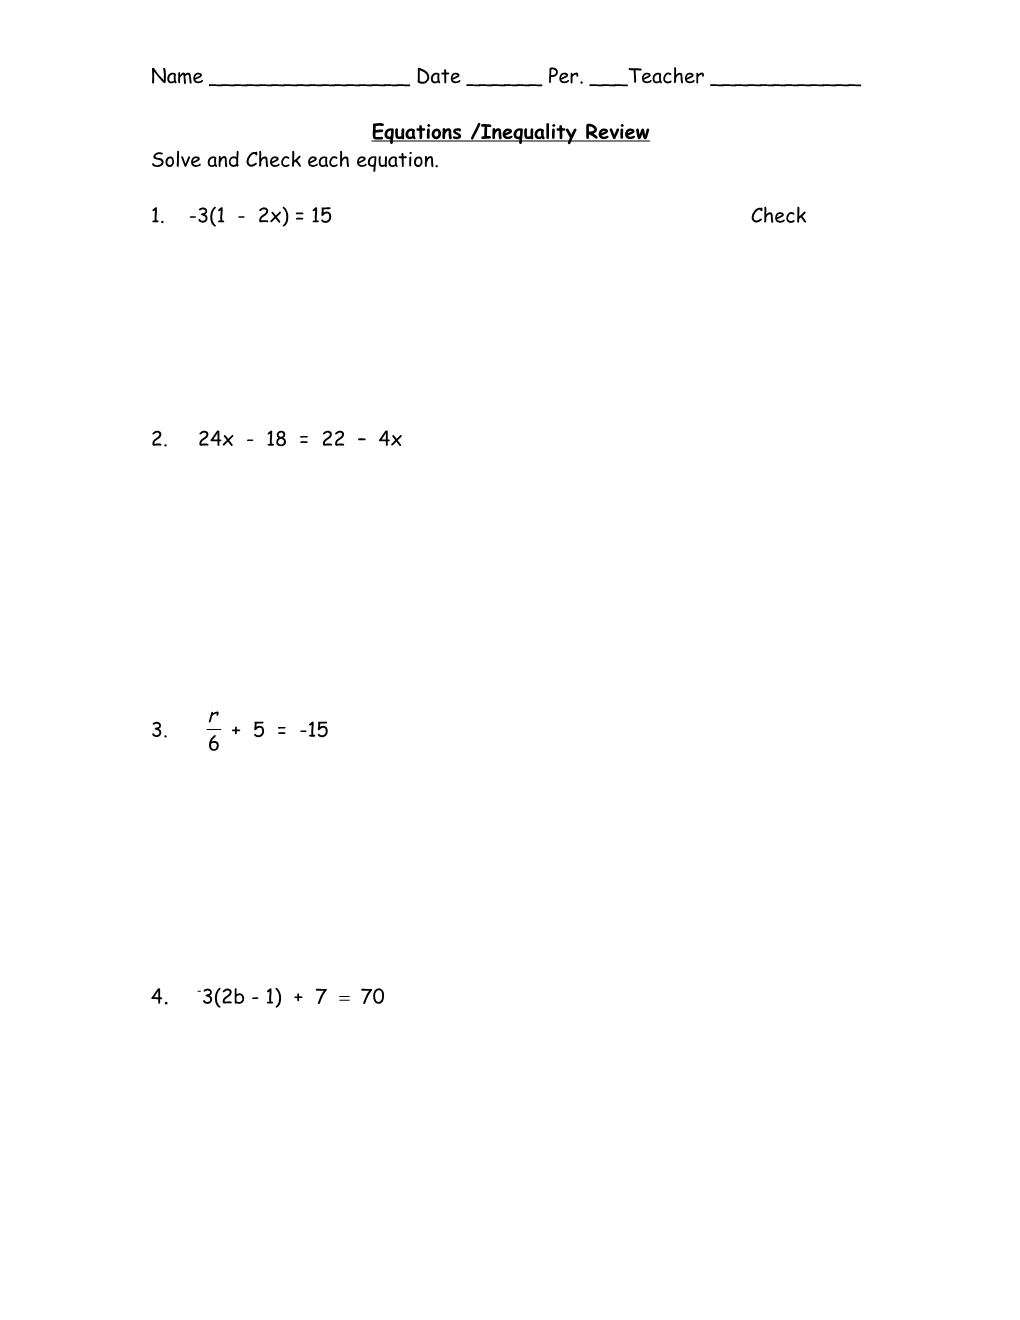 Equations /Inequality Review